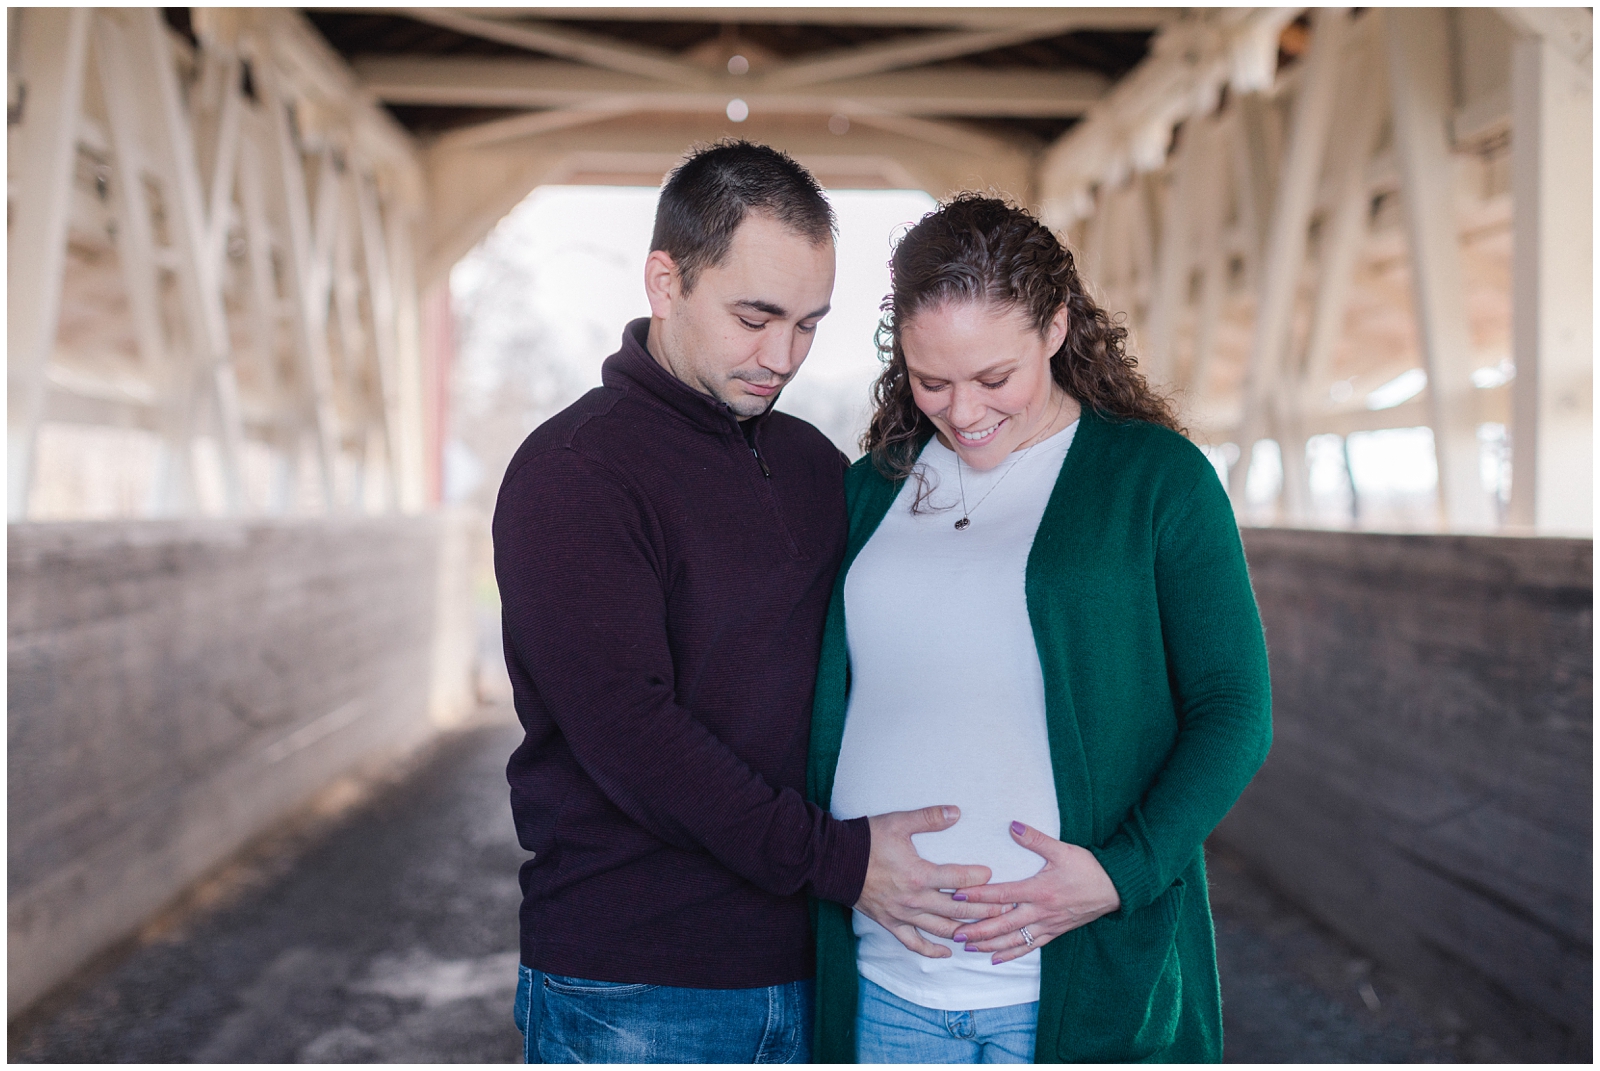 Maternity Session in Marysville